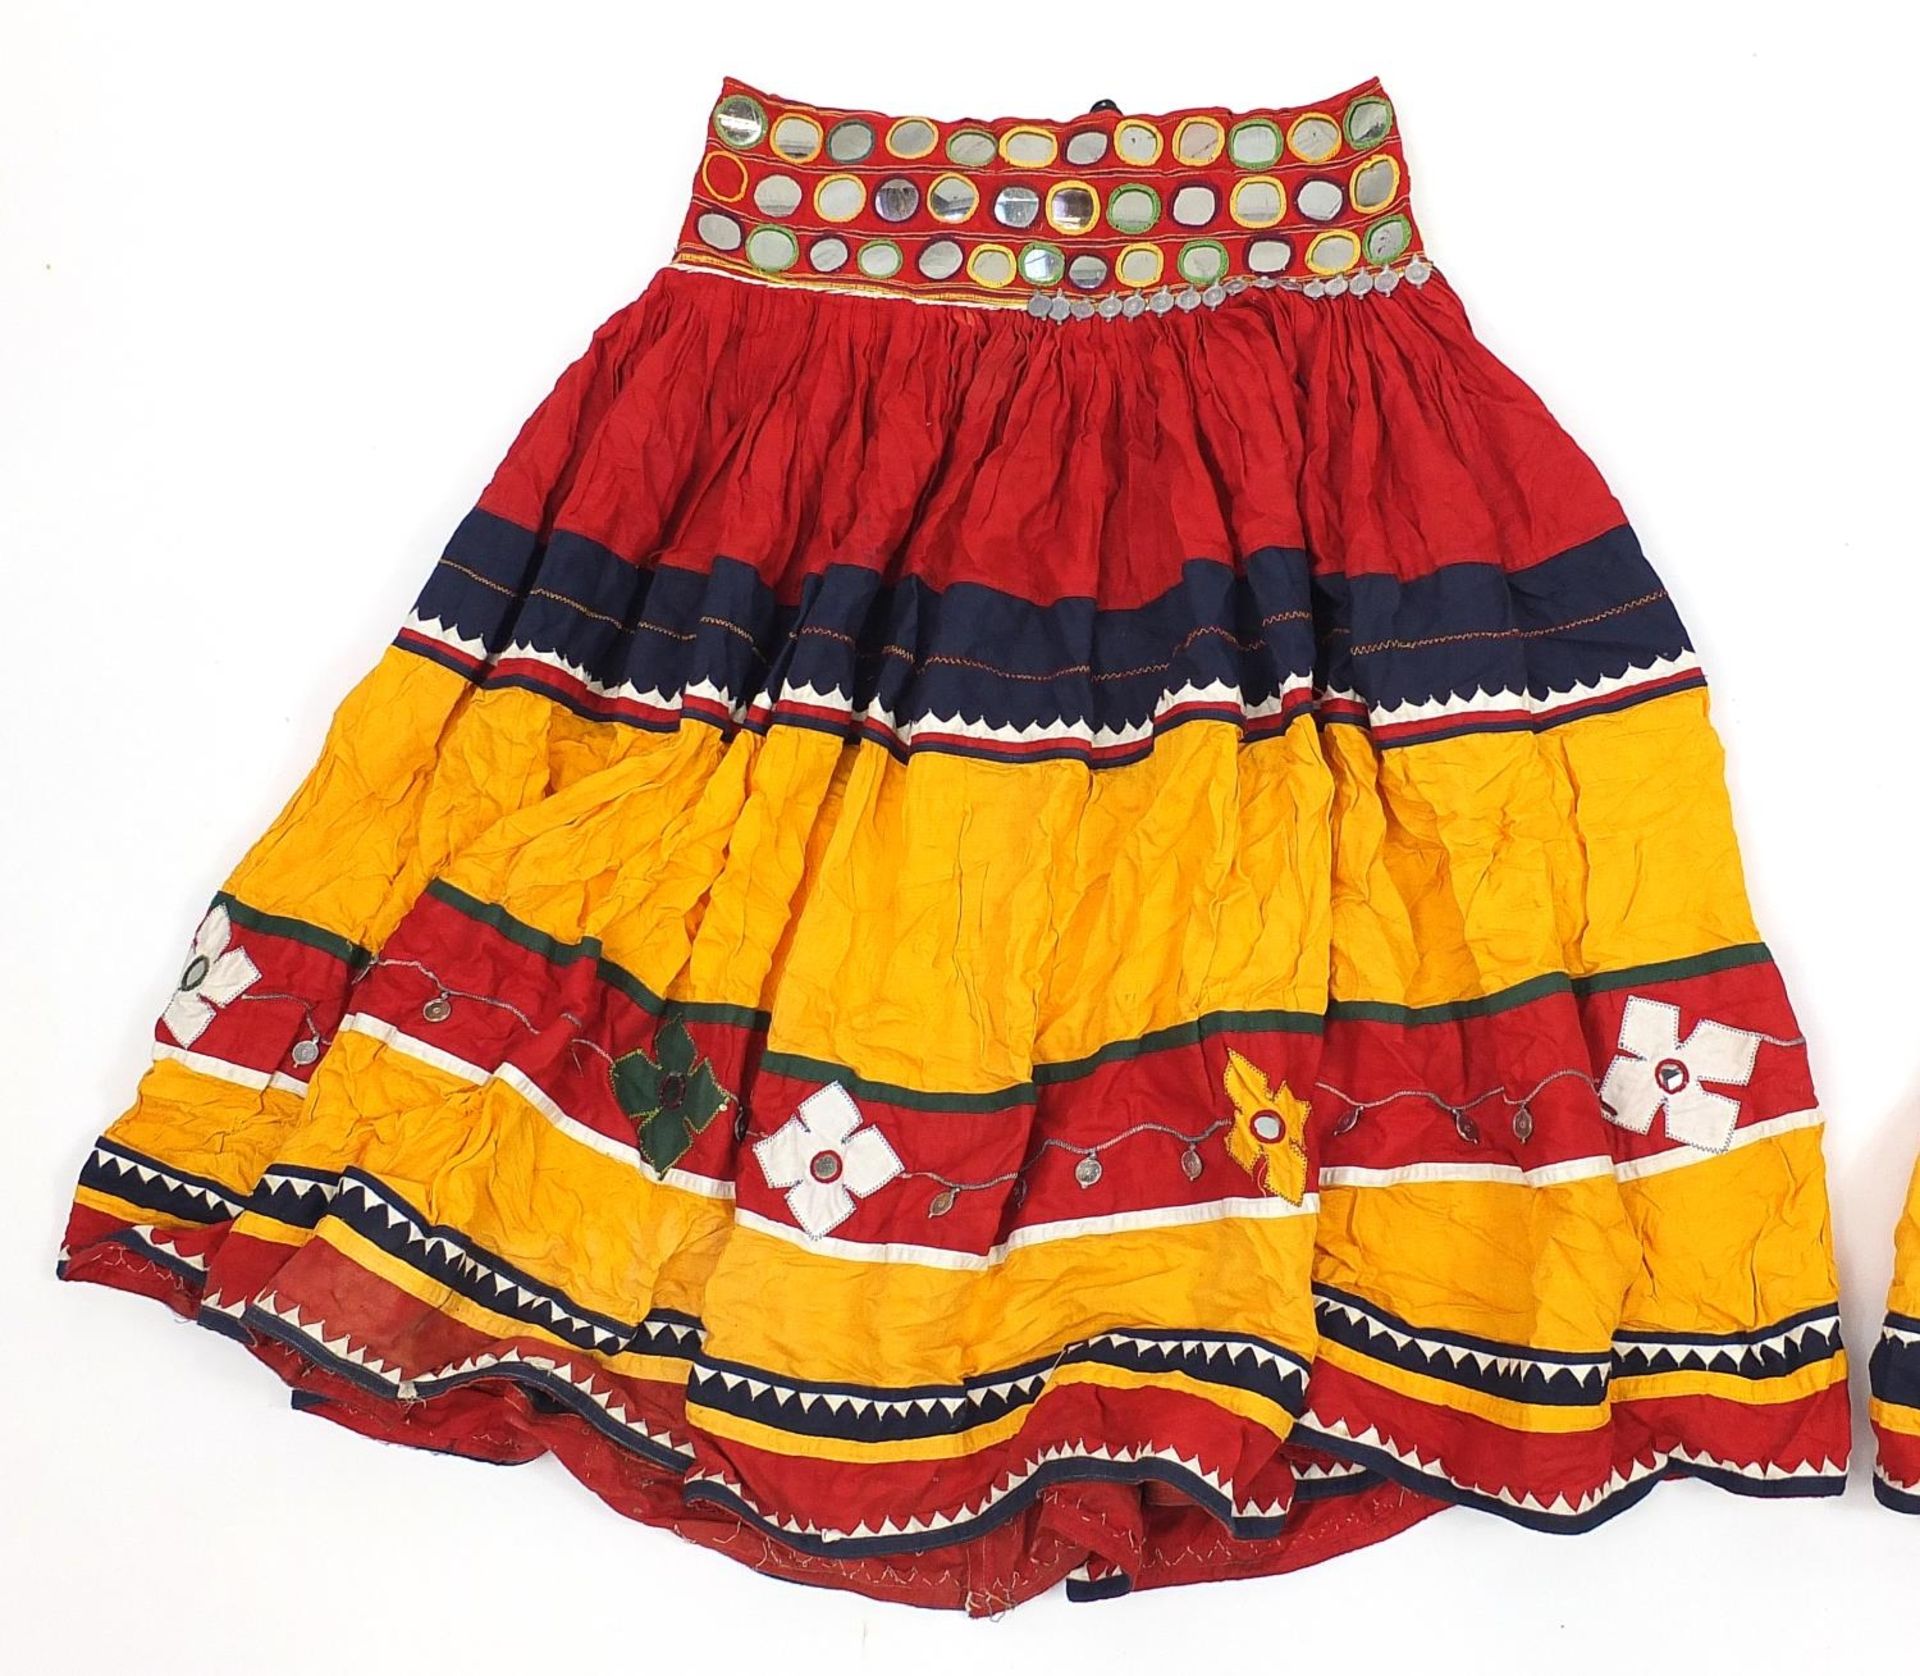 Two Middle Eastern or Indian mirrored embroidered skirts, possibly Banjara tribe, each 83cm high - Image 2 of 5